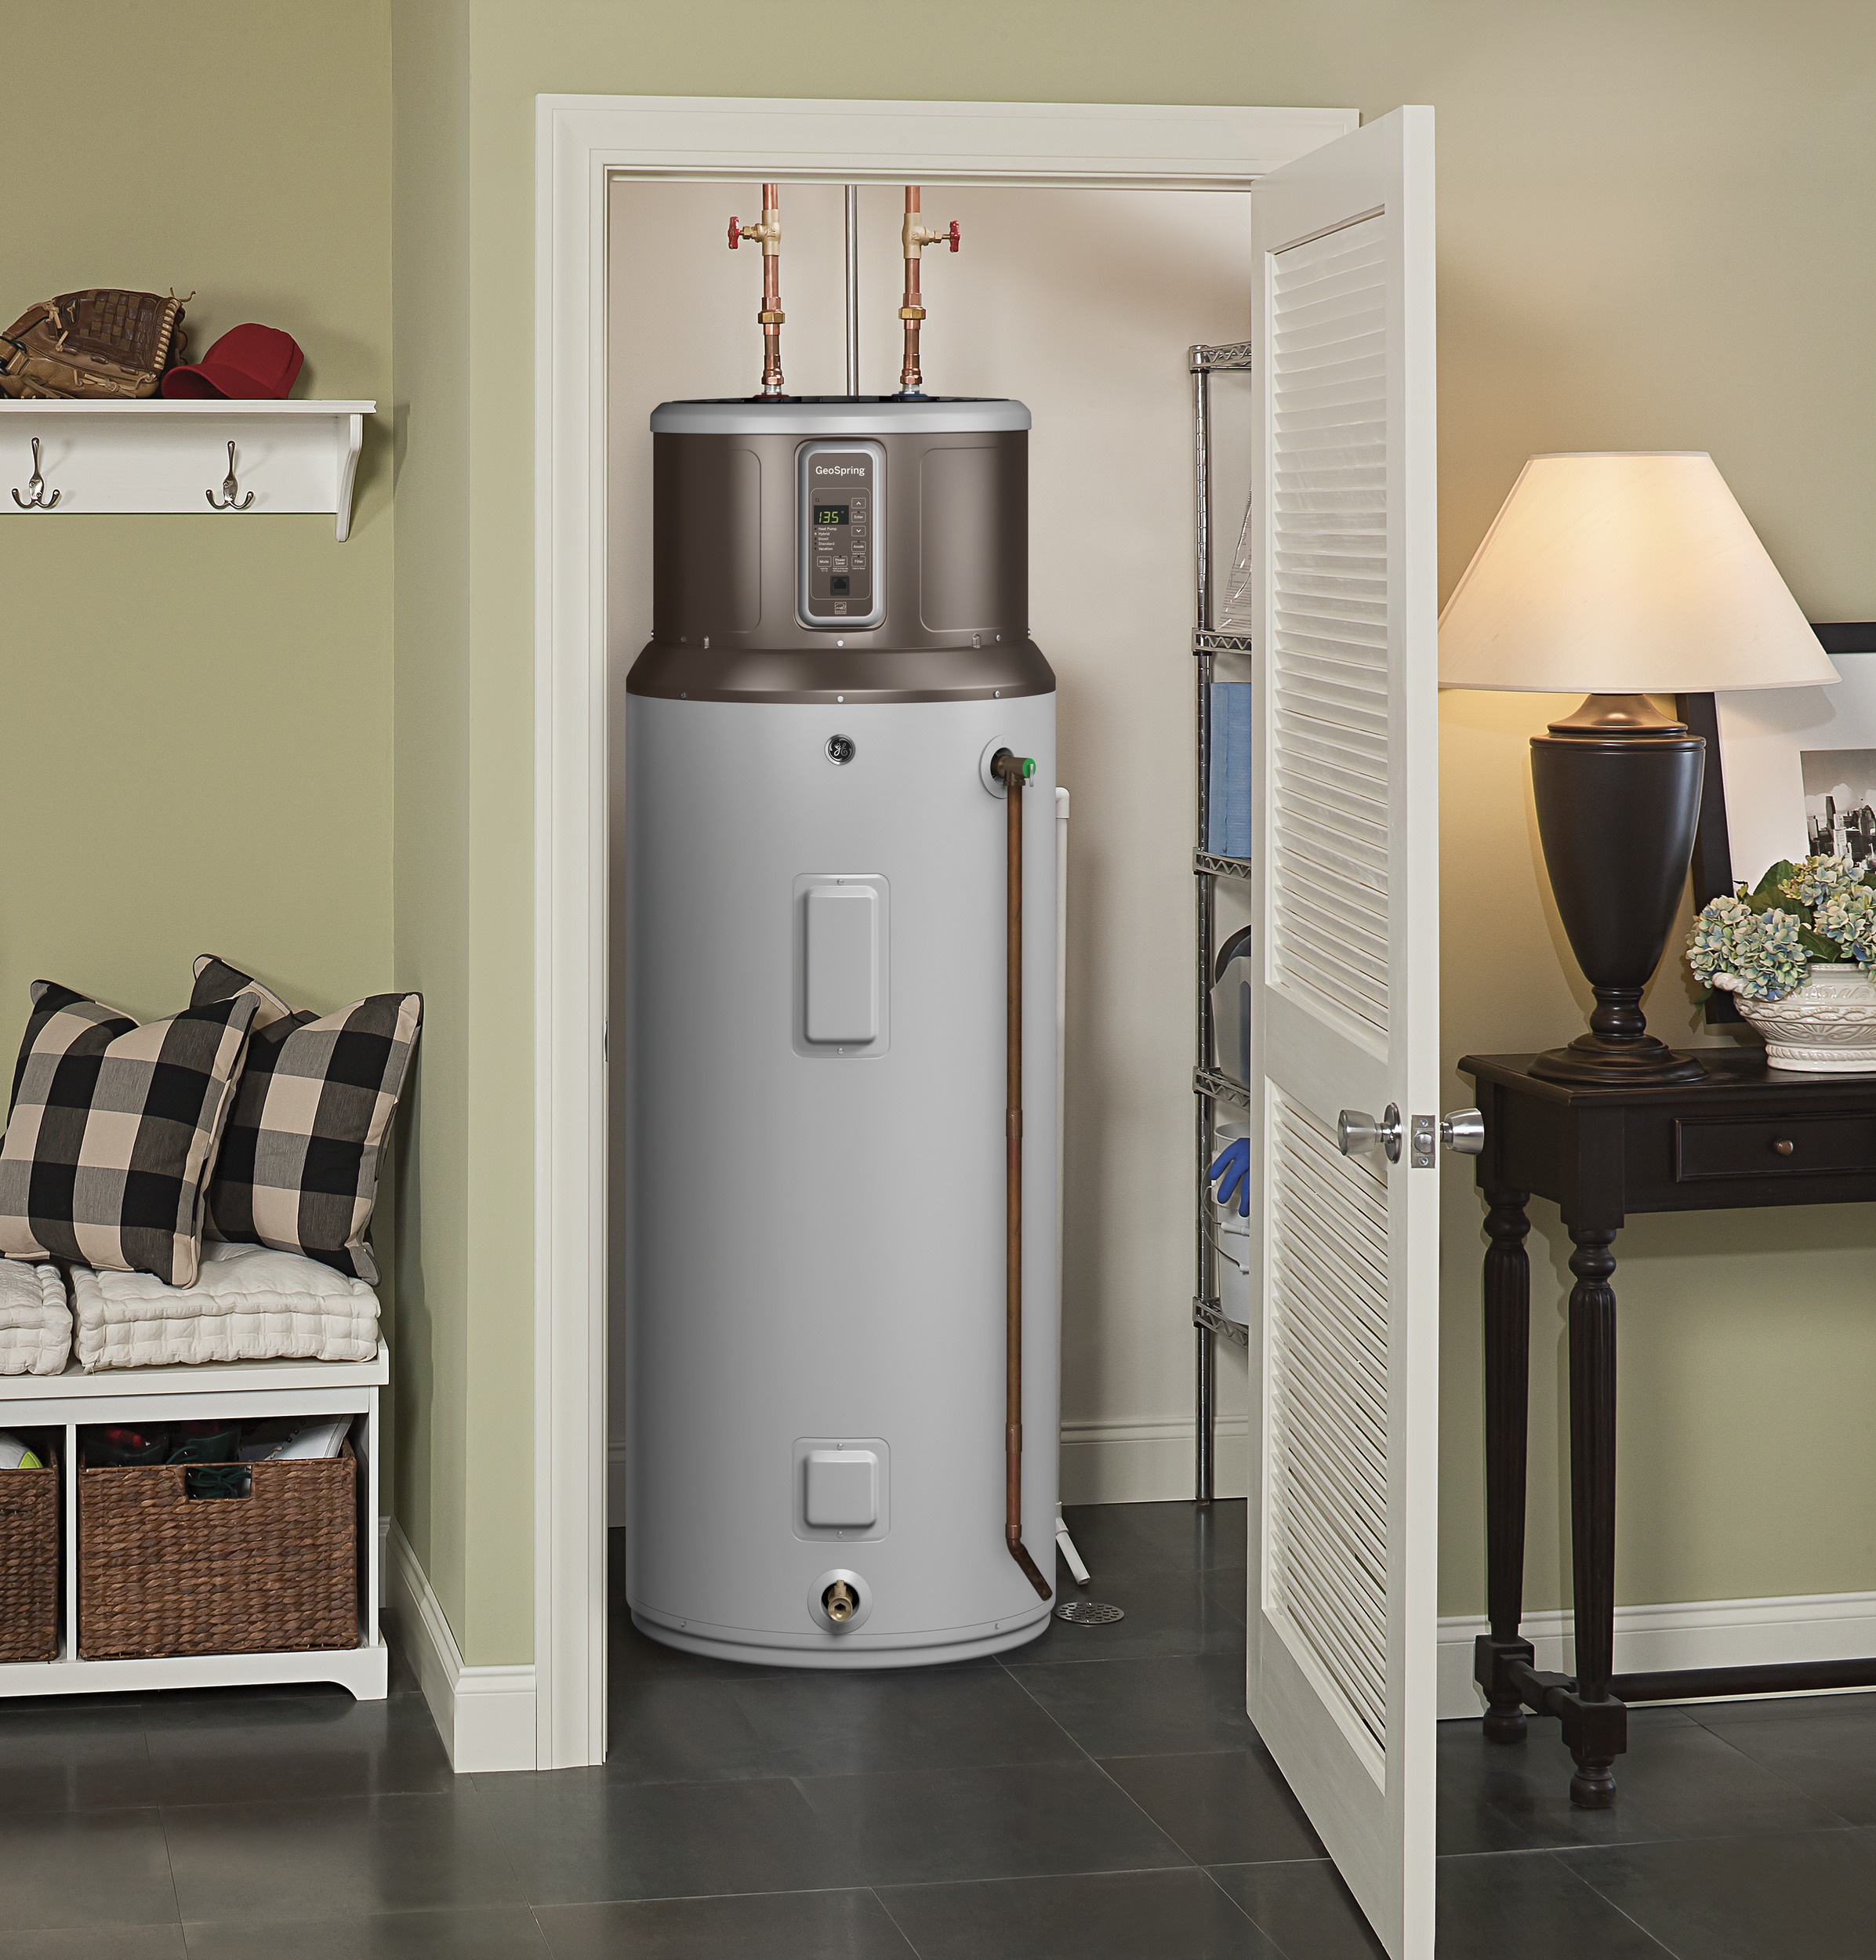 Water Heaters for Sale - Gas, Electric, Propane & Hybrid Water Heaters